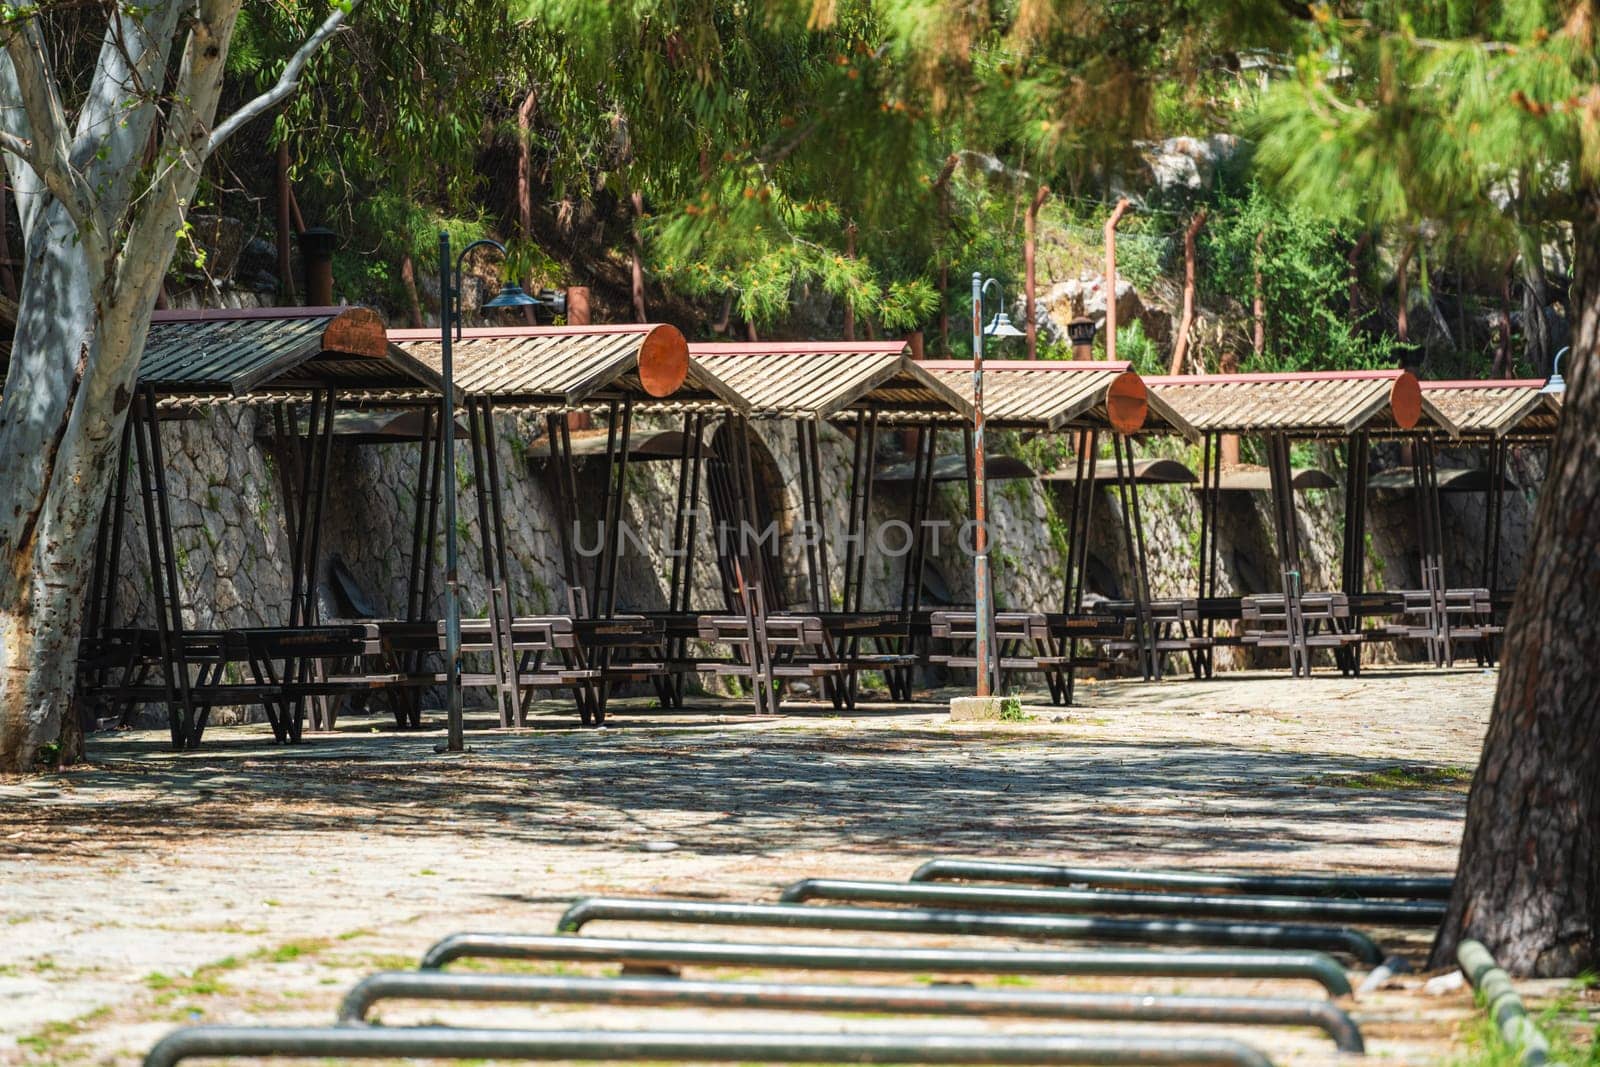 Topcam picnic area by the sea in Antalya, Turkey